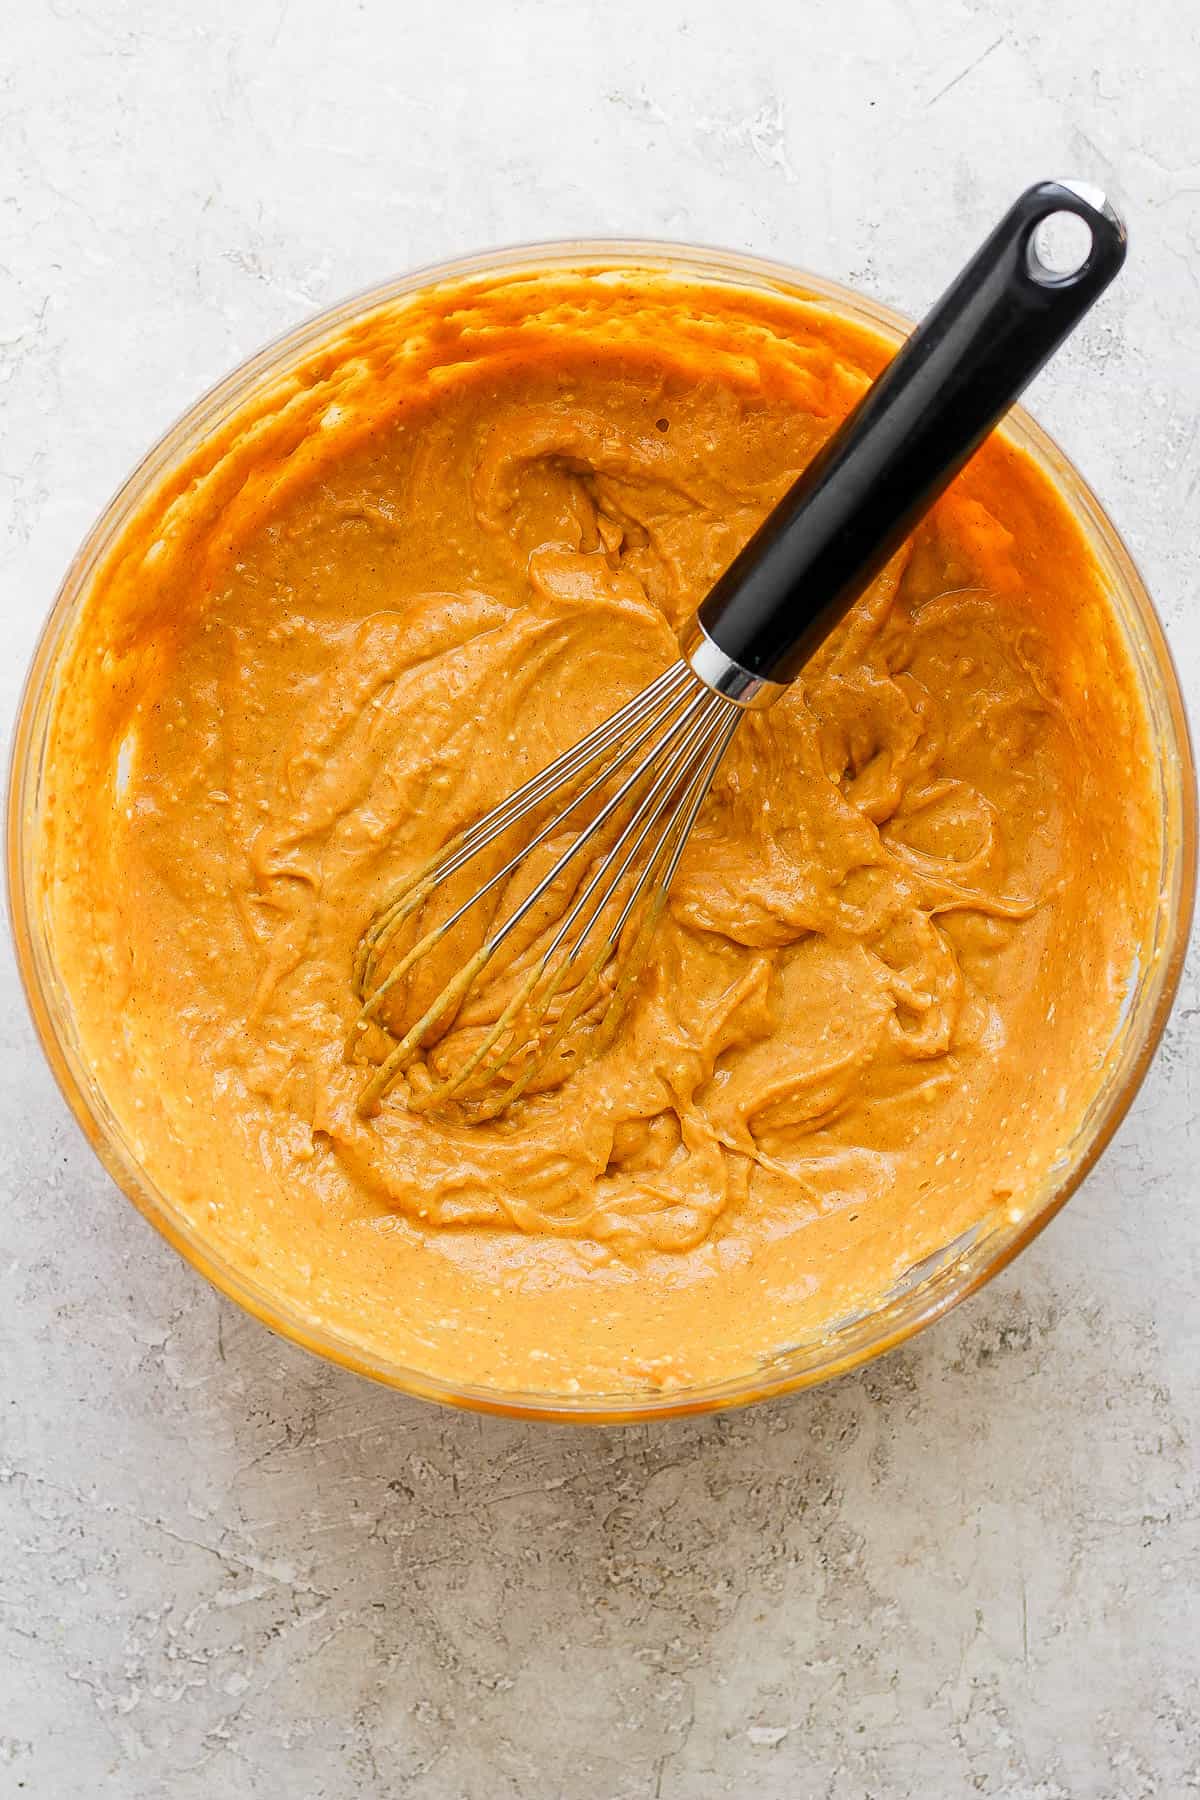 The pumpkin filling whisked together in a glass bowl with the whisk.